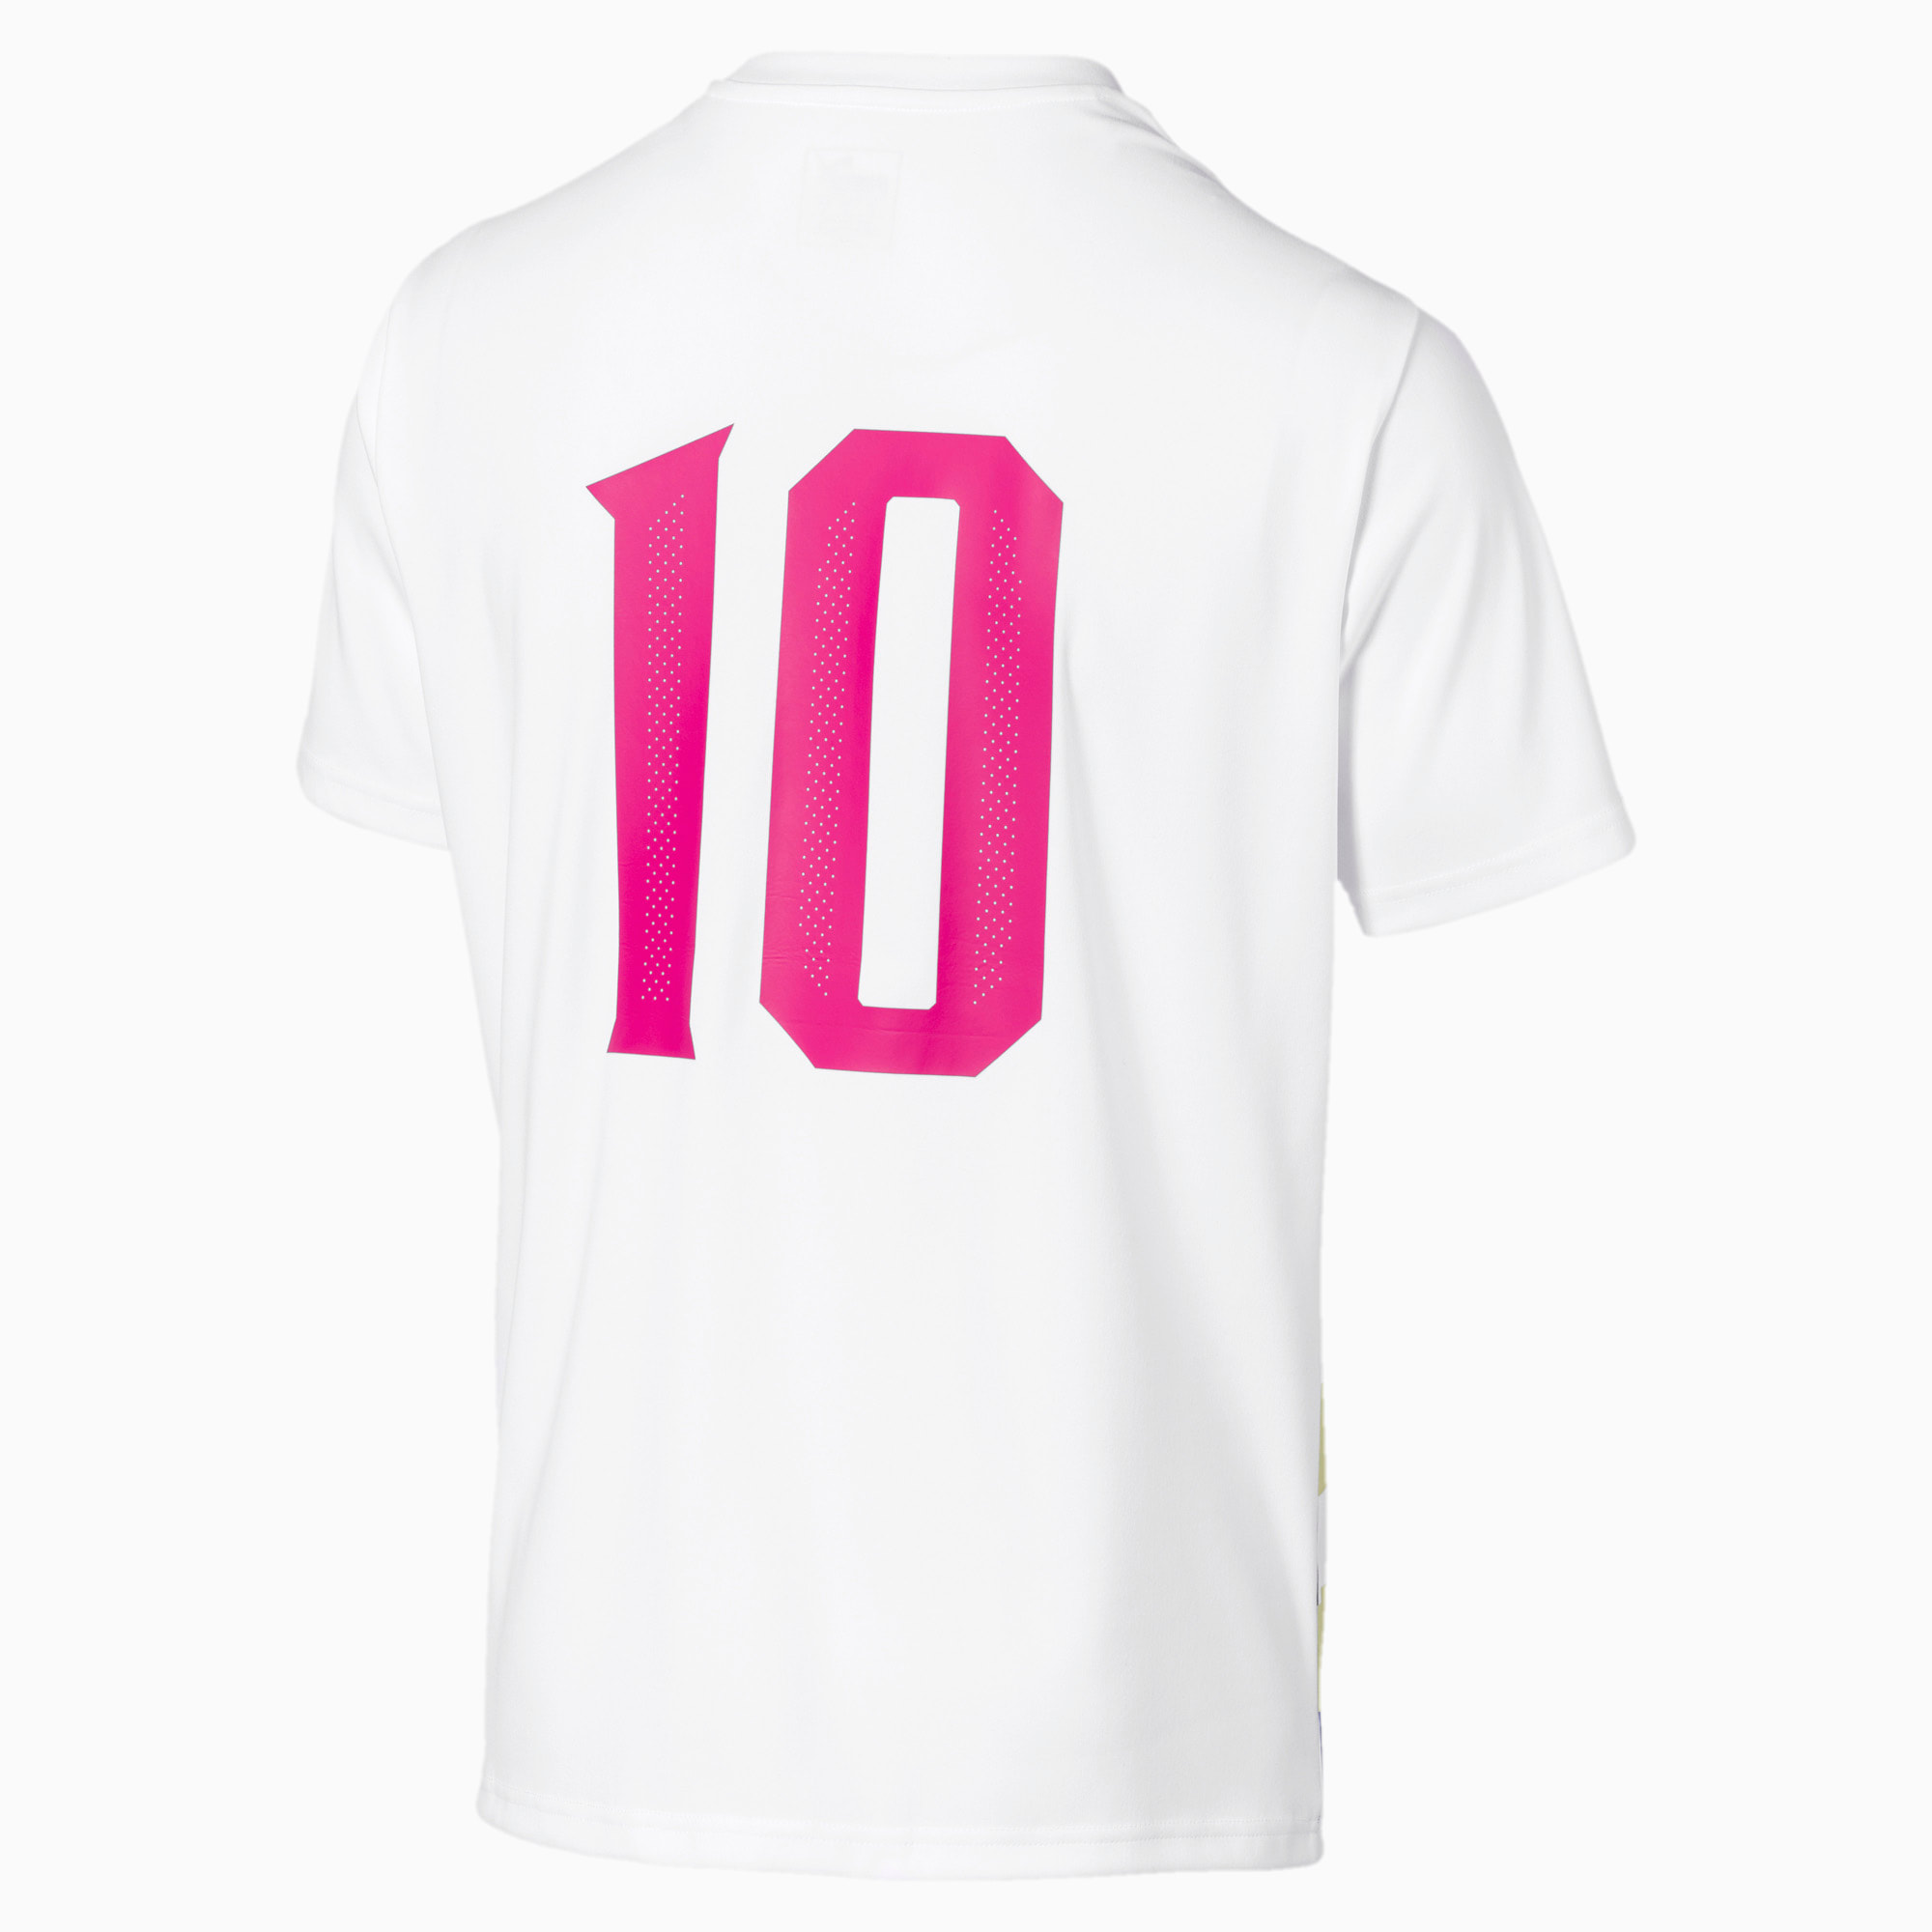 pink and white jersey